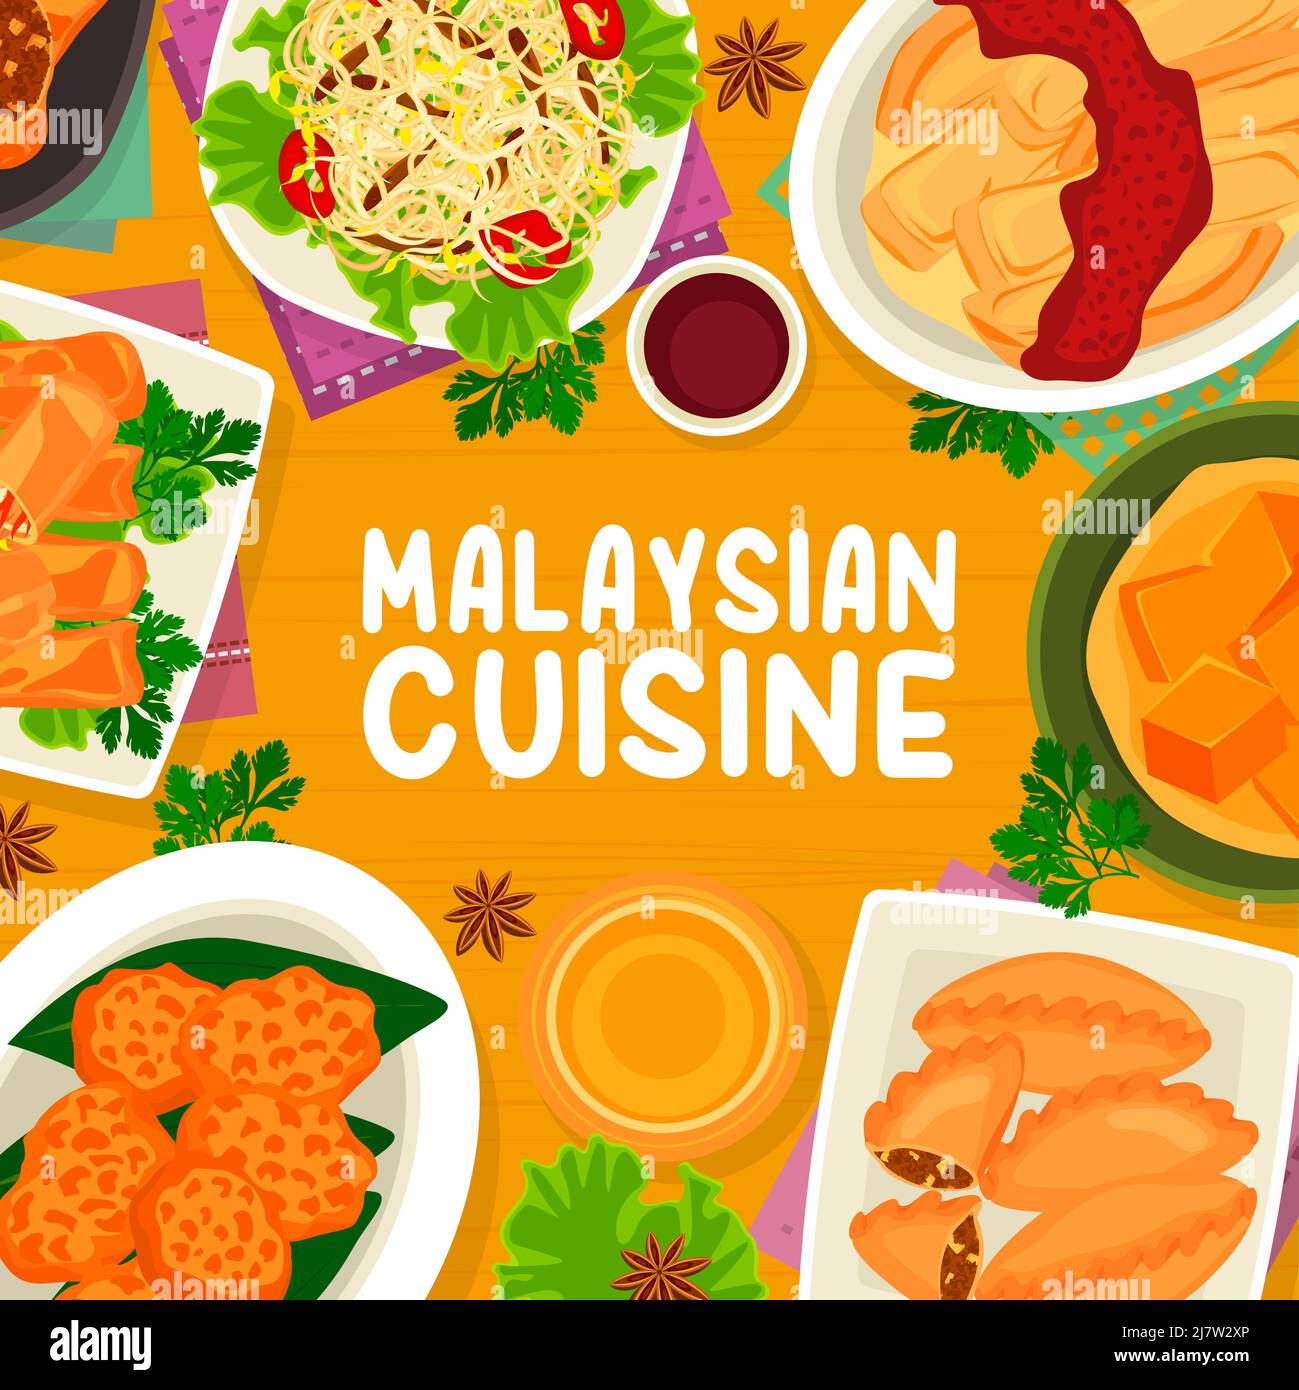 Malaysian cuisine menu cover vector beef and prawn noodle soups, tofu pudding and nasi lemak rice. Braised bean curd with mushrooms, banana leaf rice tarditional food meals of Malaysia, asian dishes Stock Vector